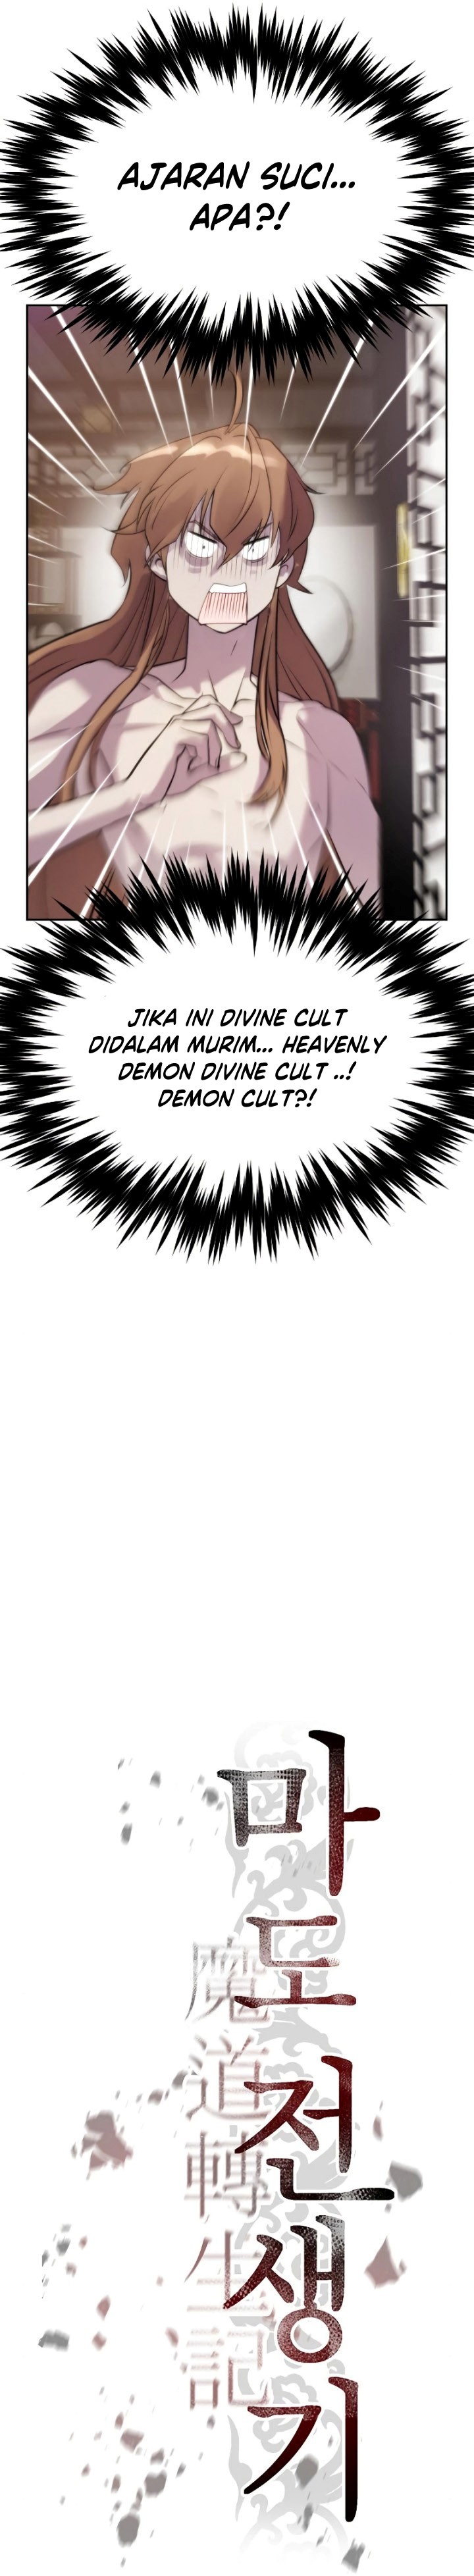 Chronicles of the Demon Faction Chapter 03 Image 29